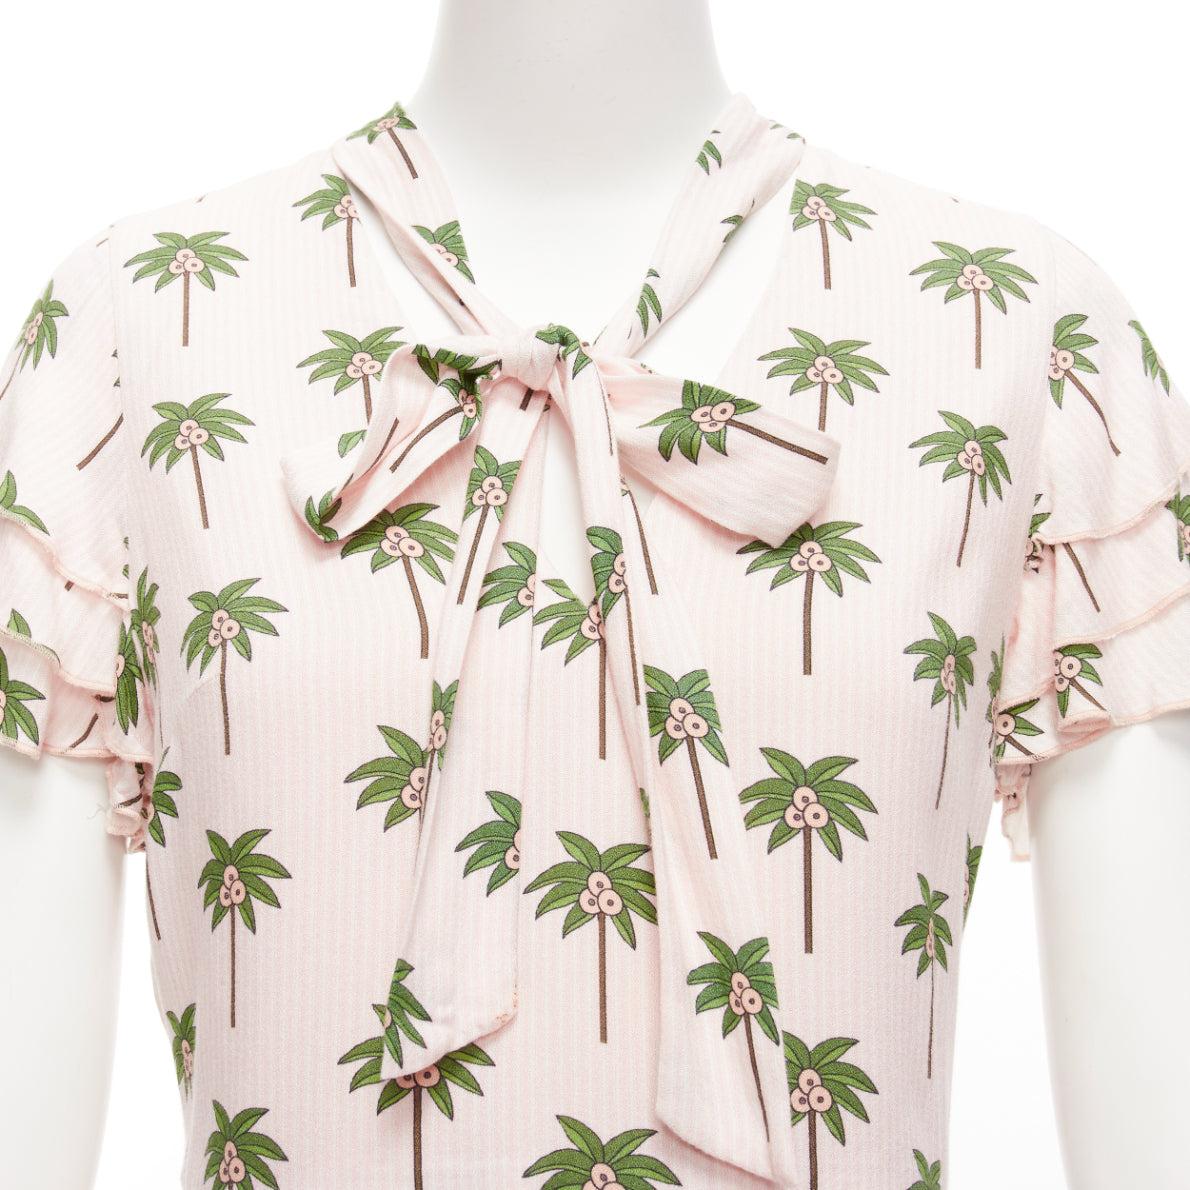 ALICE OLIVIA pink green coconut palm tree frill sleeves bow tie romper US8 L
Reference: KYCG/A00012
Brand: Alice Olivia
Material: Viscose
Color: Pink, Green
Pattern: Cartoon
Closure: Zip
Extra Details: Back zip.
Made in: China

CONDITION:
Condition: